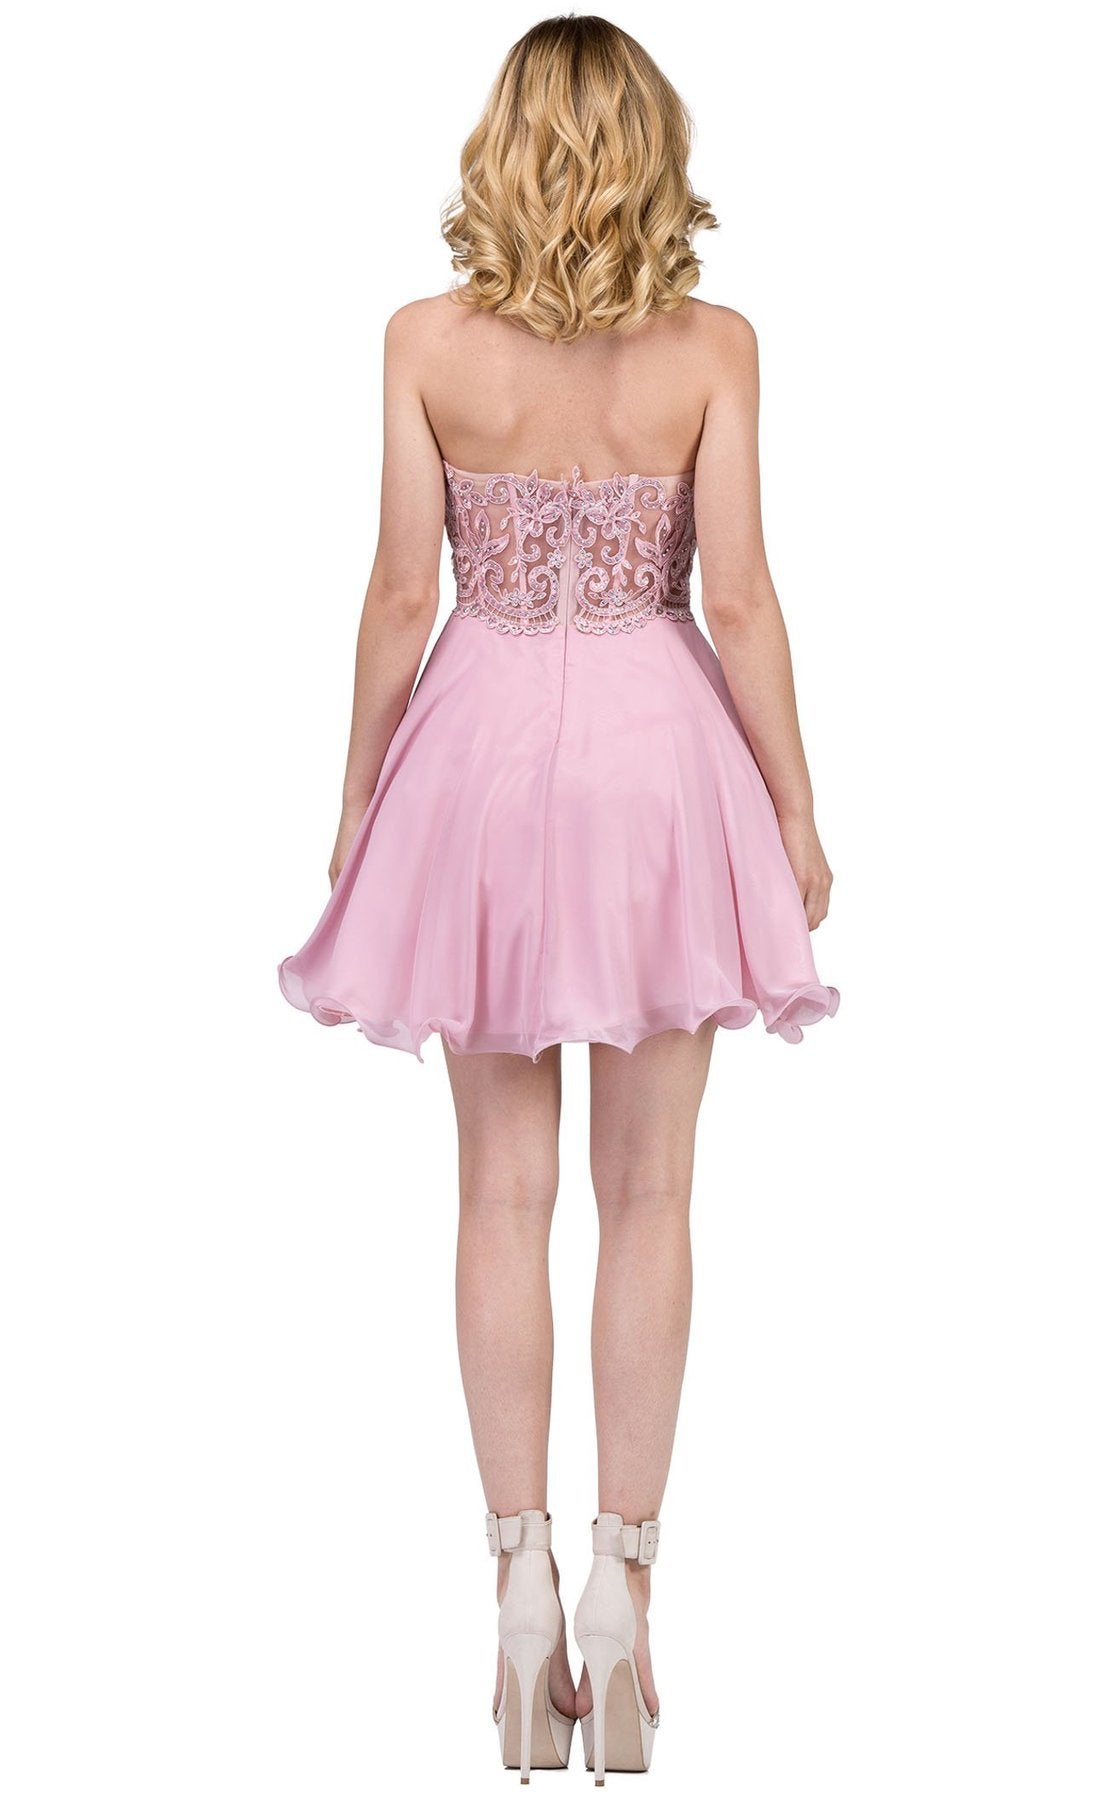 Dancing Queen - 3005SC Embellished Sweetheart A-Line Cocktail Dress